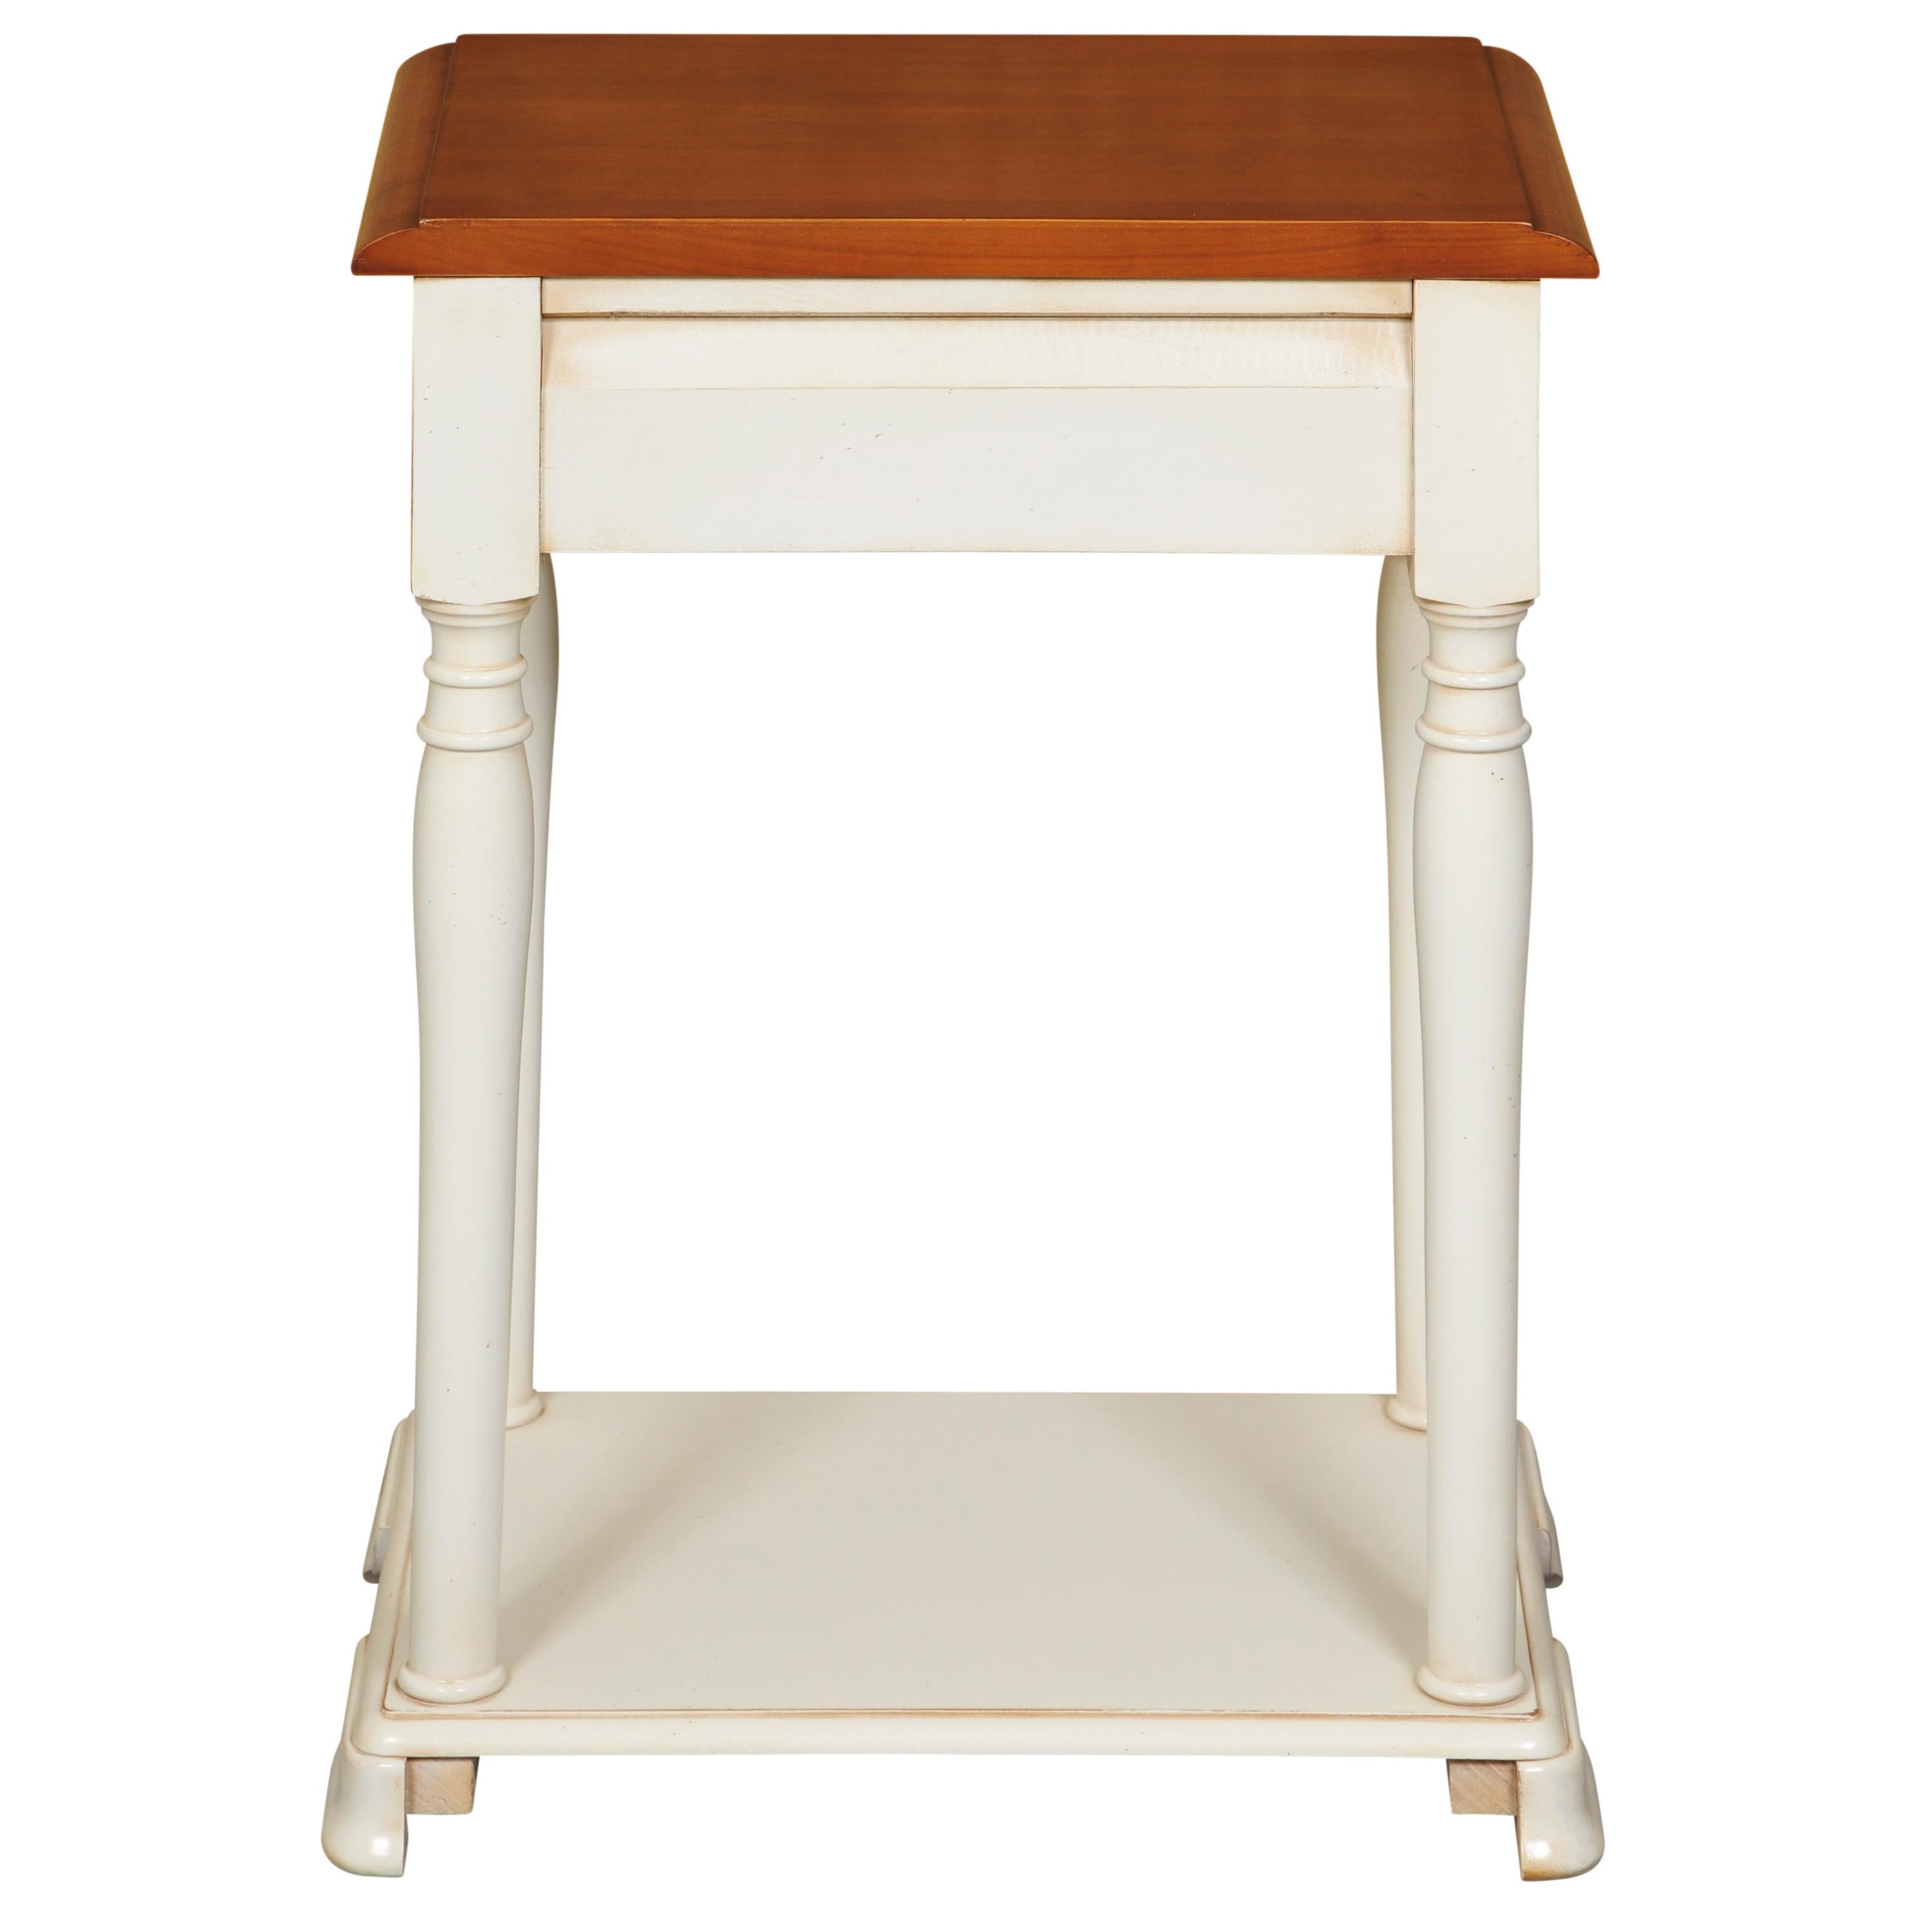 Louis Philippe Style Bedside Table, Blond Cherry and White, Cream Lacquered For Sale 3